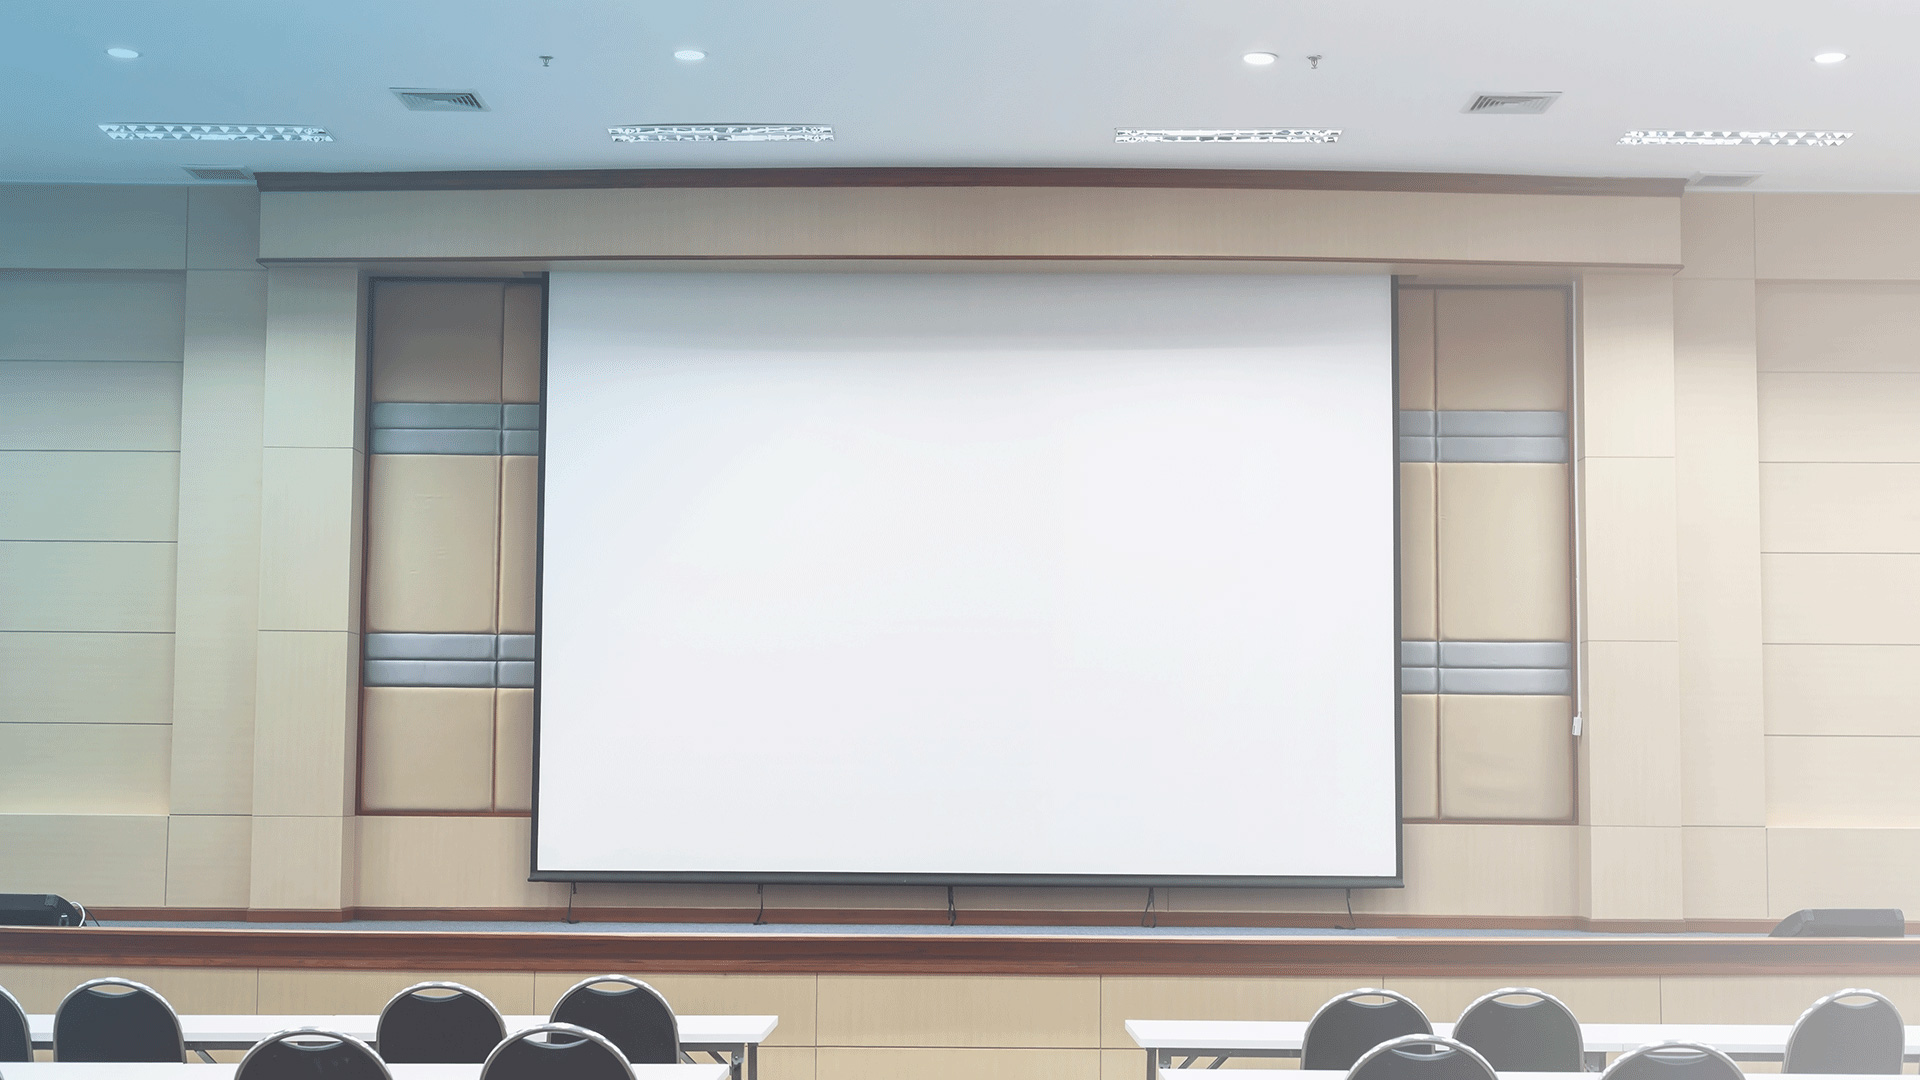 University lecture hall with a projector screen